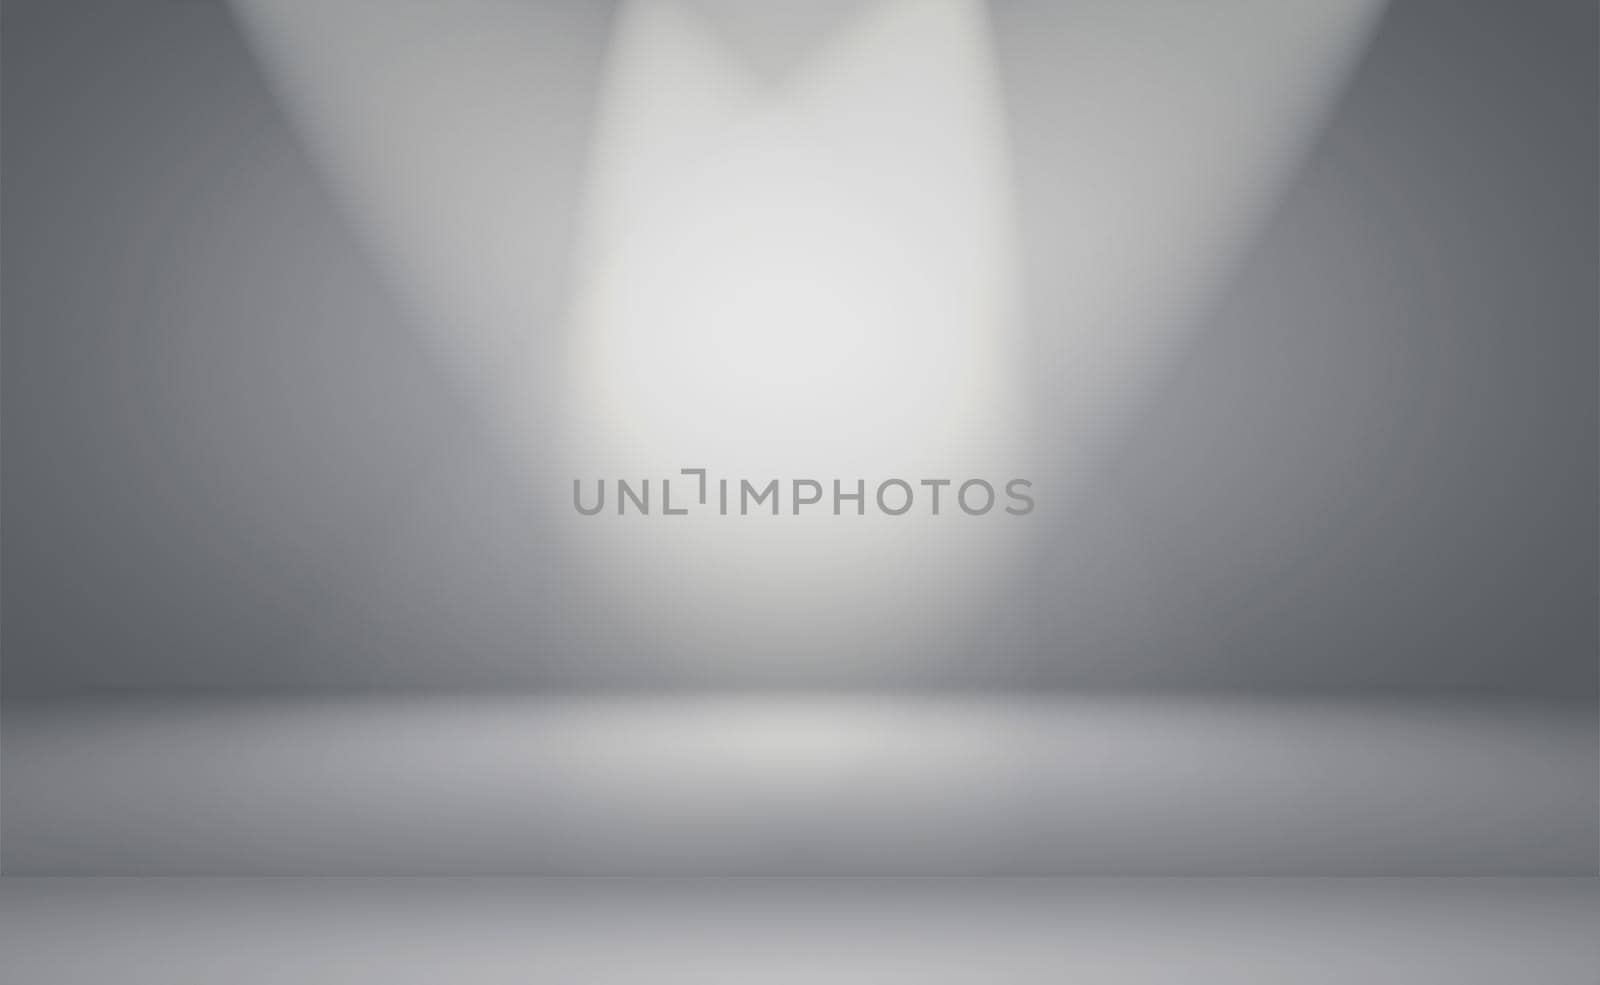 Abstract luxury blur dark grey and black gradient, used as background studio wall for display your products